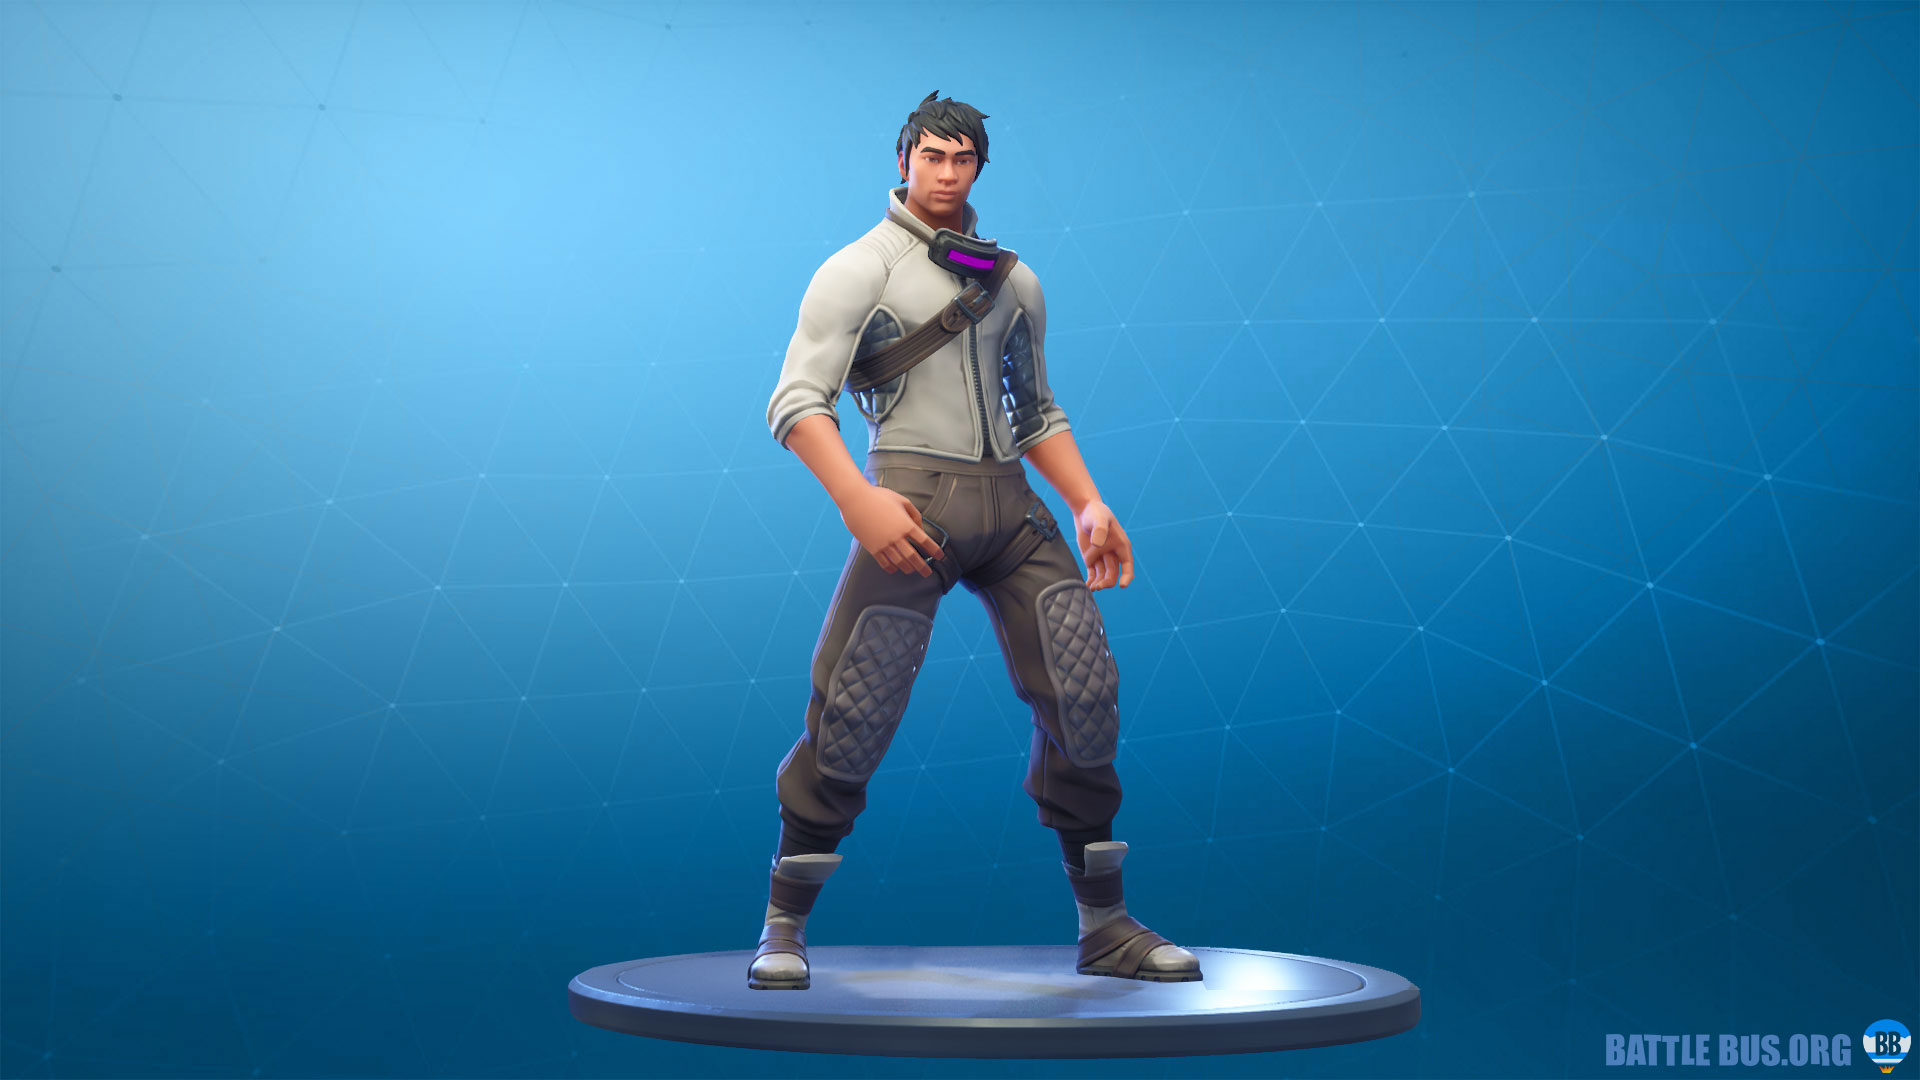 Zenith Fortnite Outfit Progressive Skin HD Image And Stats